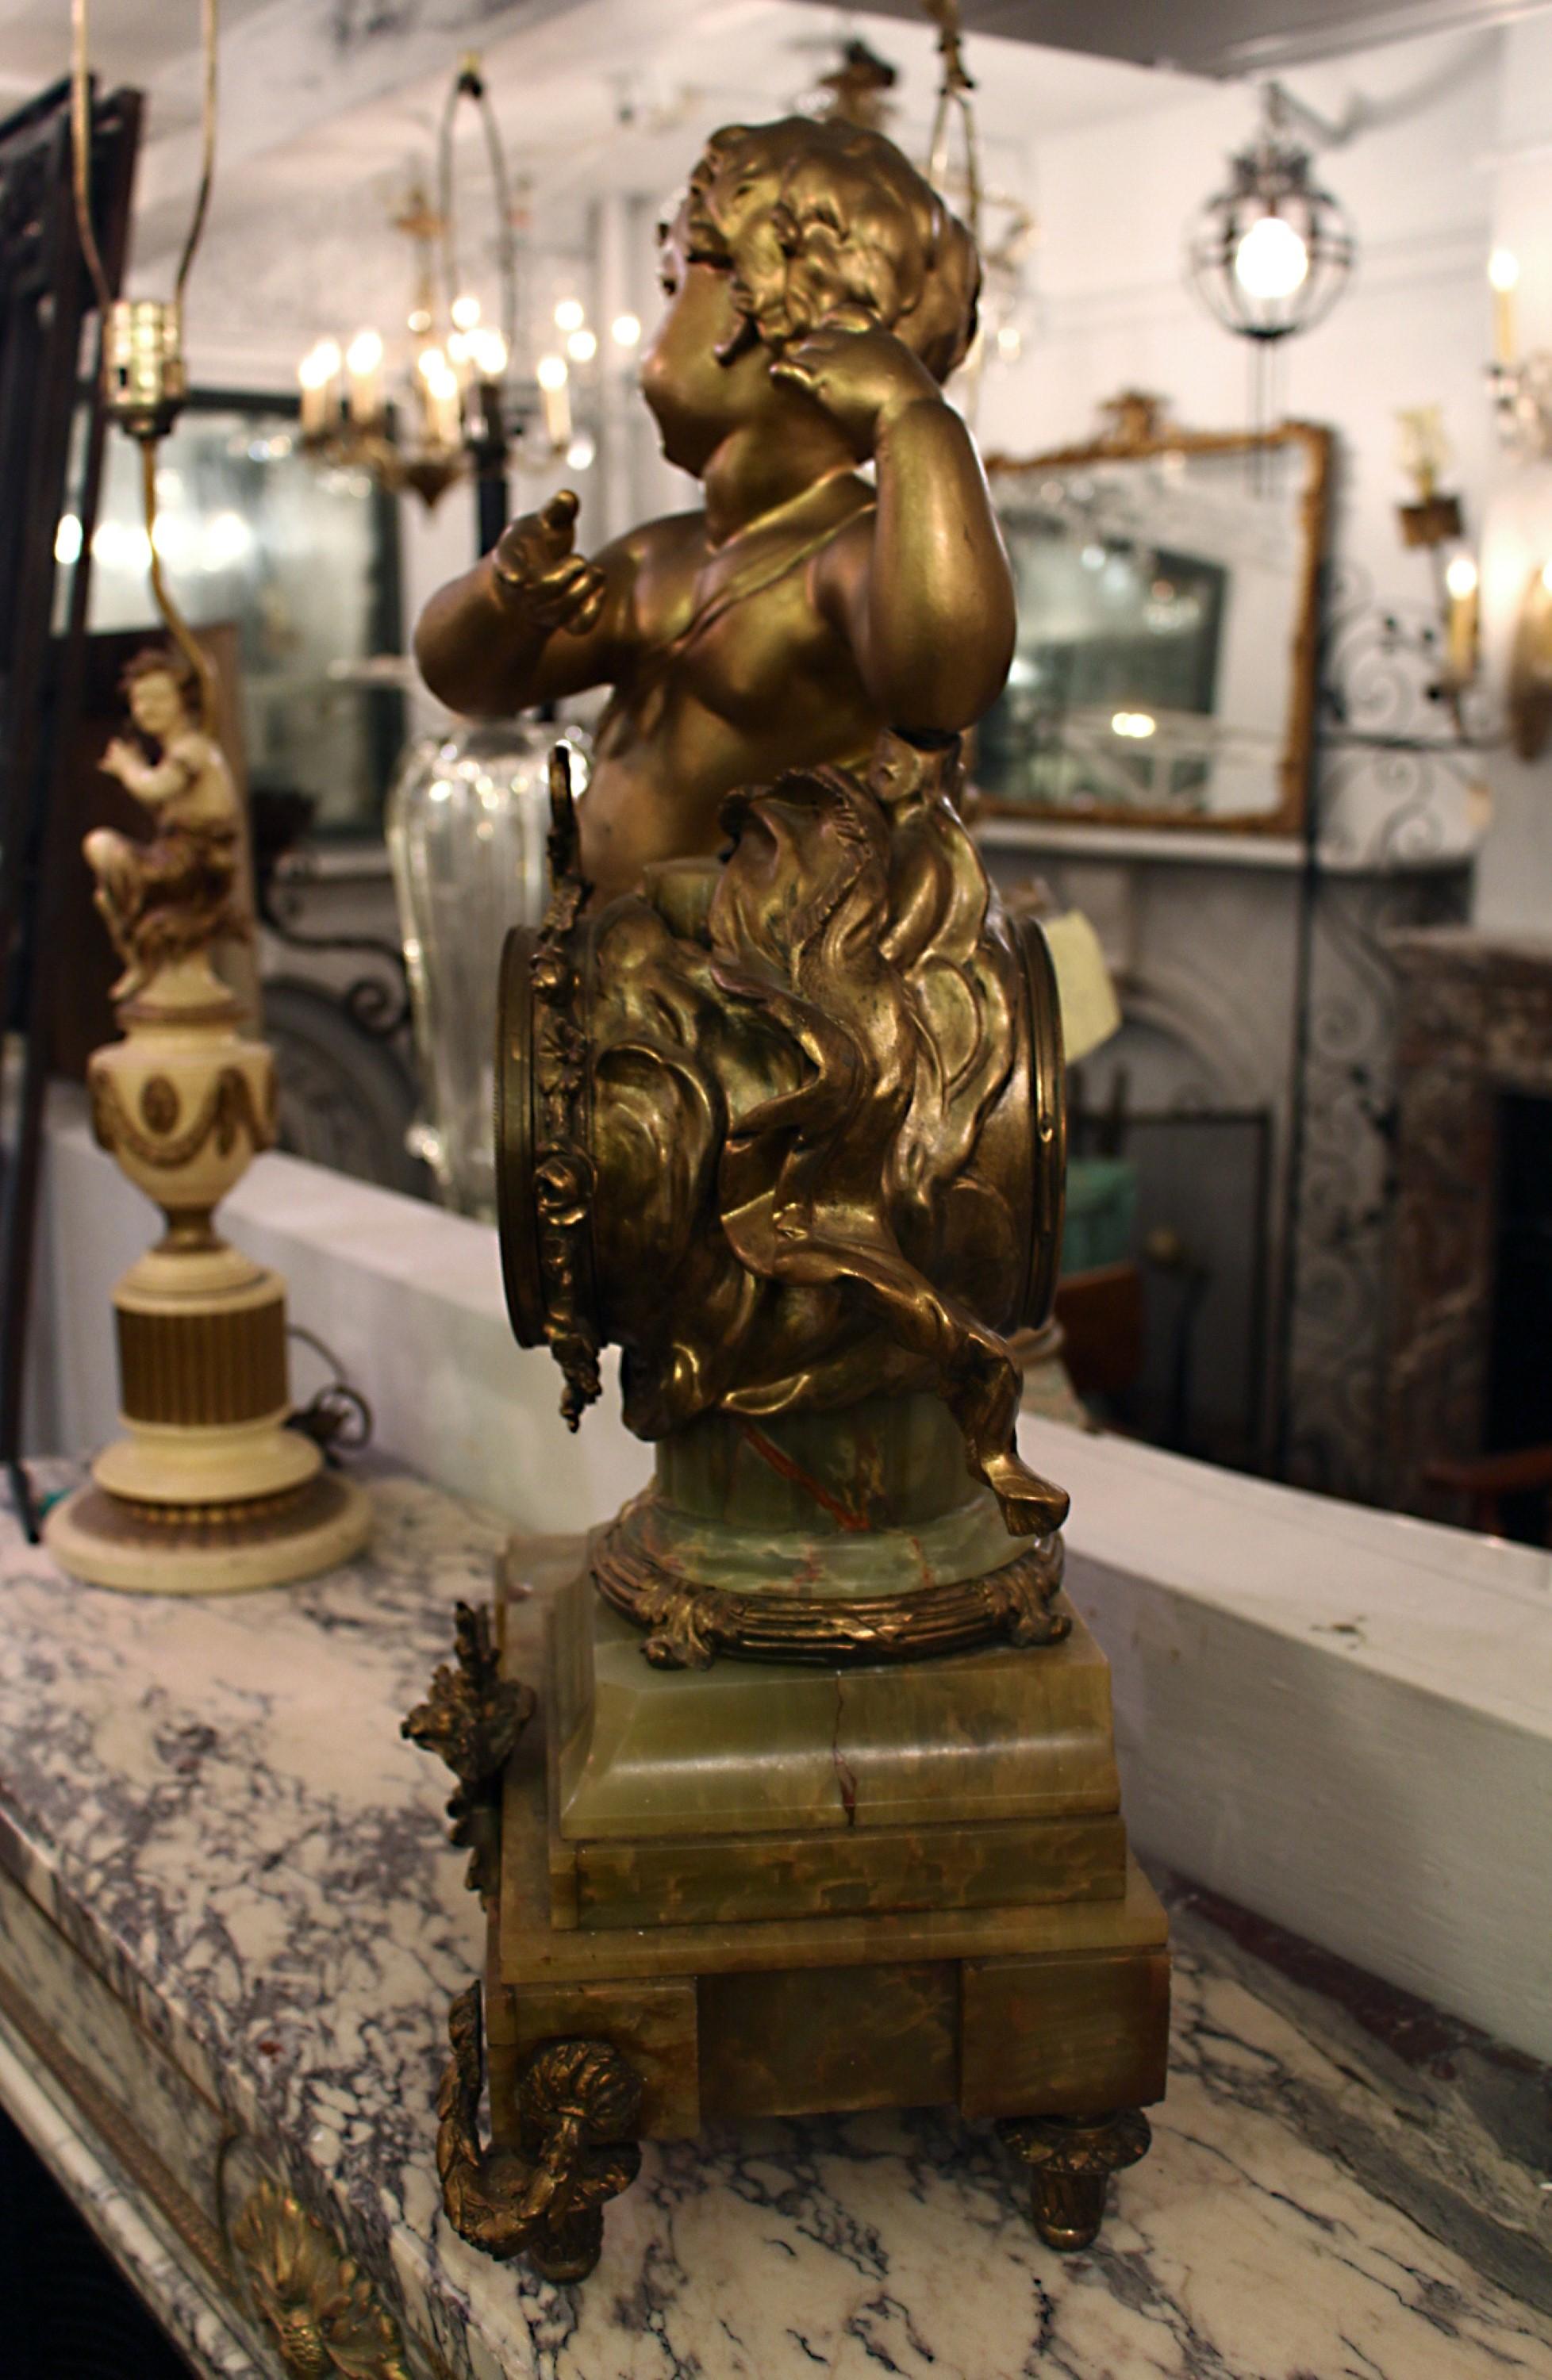 Decorative French bronze mantle clock on an onyx base with a large spelter Cherub. The clock is in need of repair. Priced as is, considering its current condition. Please note, this item is located in one of our NYC locations.